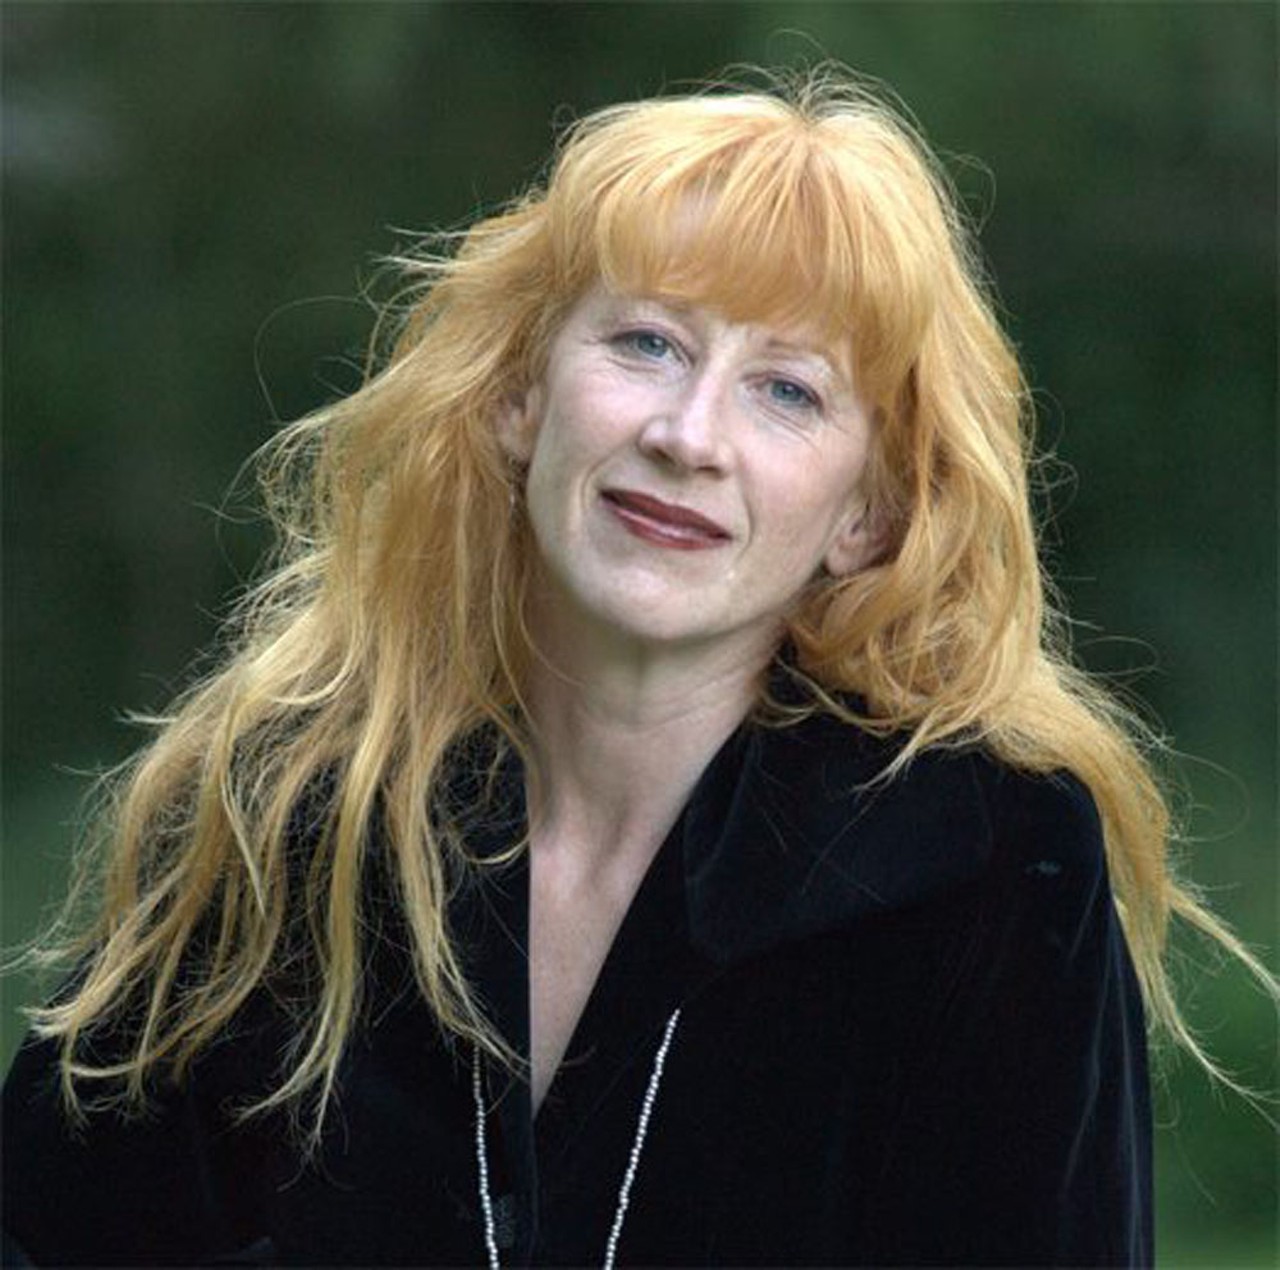 Loreena McKennit, a pianist, composer, accordionist, harpist, and all-around extraordinaire who has been active in World Music since the mid-1980s will be in Ann Arbor performing Celtic and Middle Eastern themes. The accomplished Canadian musician will be playing pieces from her nine studio albums, and you can probably count on hearing her most popular hits &#147;Snow&#148; and &#147;Ancient Pines. 
Wednesday, 10/12; Loreena McKennit @ The Michigan Theater; Doors at 7 p.m.; 603 E. Liberty St., Ann Arbor; michtheater.org; tickets are $35-$89.50.